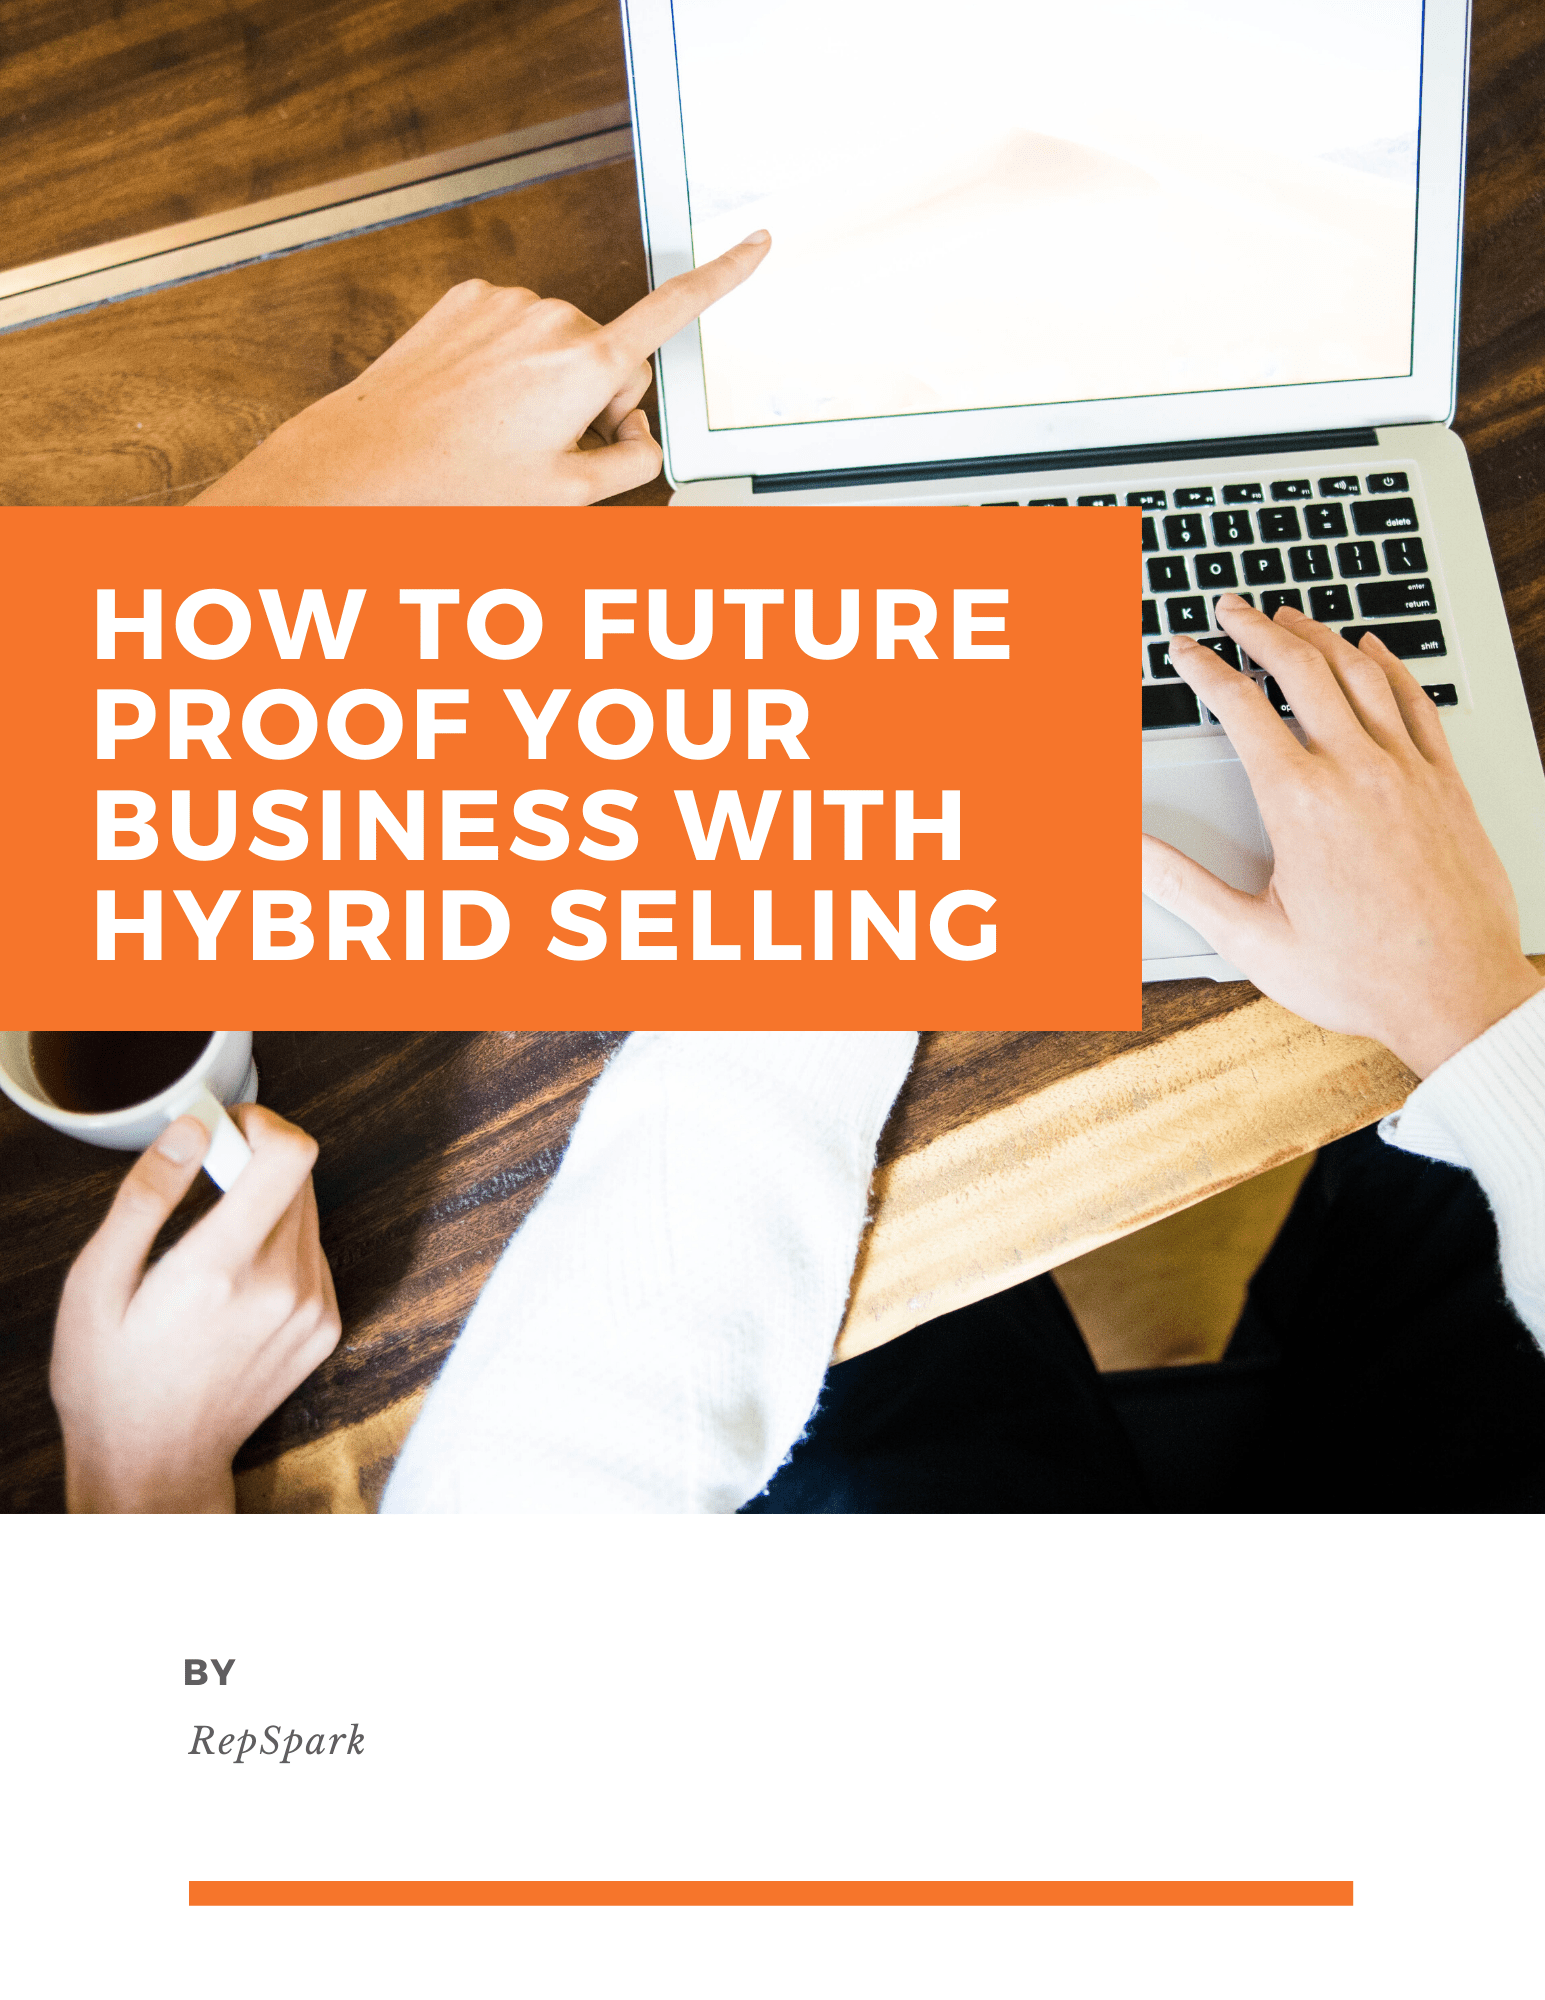 RepSpark  How to Future-Proof Your Business with Hybrid Selling